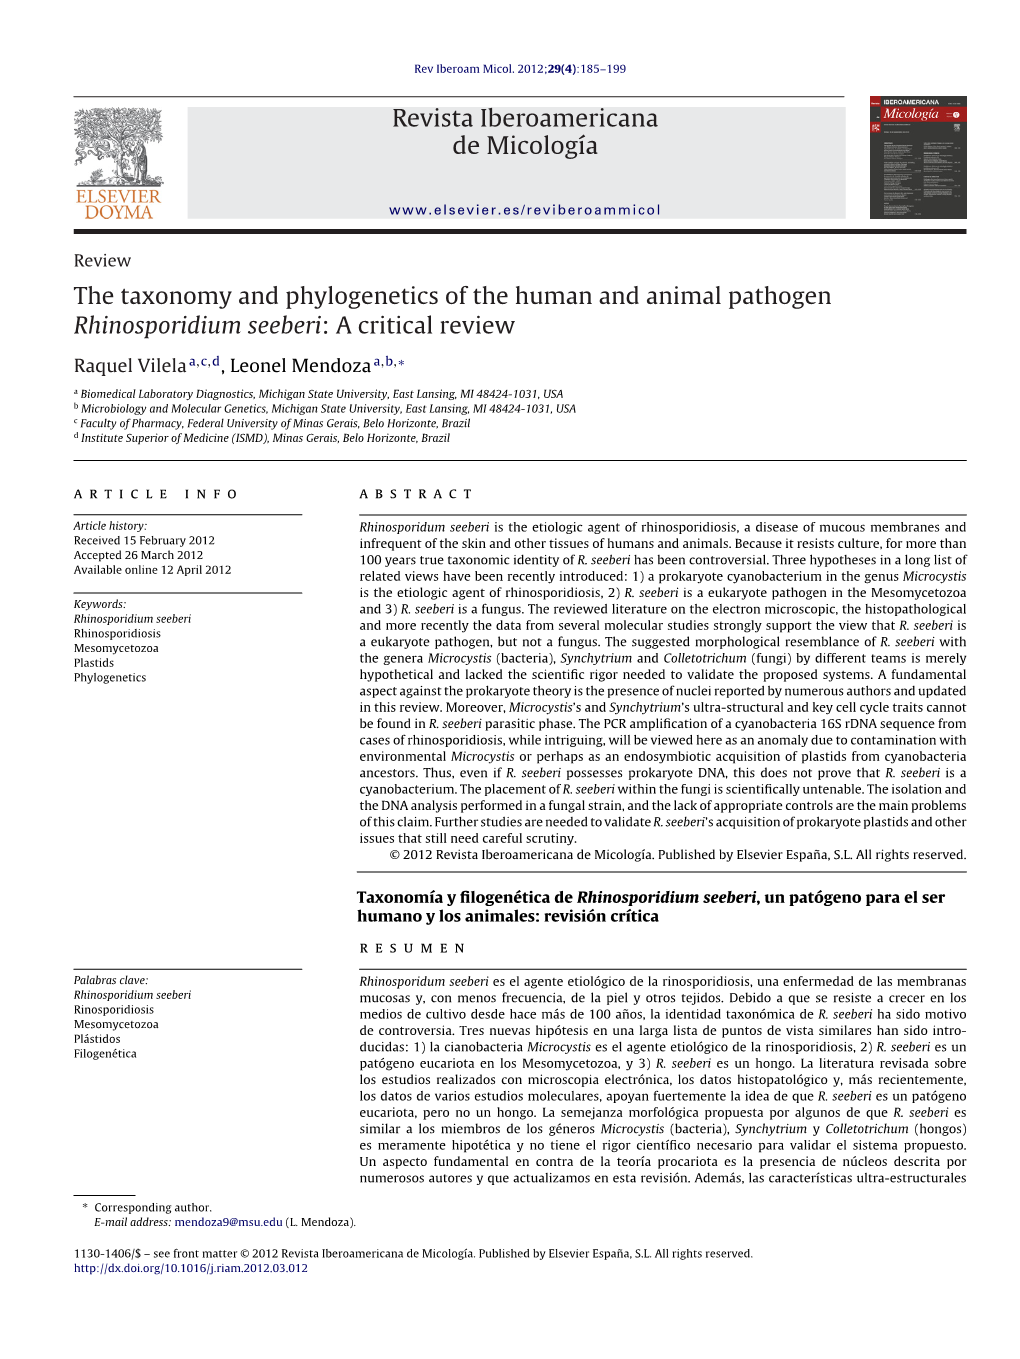 The Taxonomy and Phylogenetics of the Human and Animal Pathogen